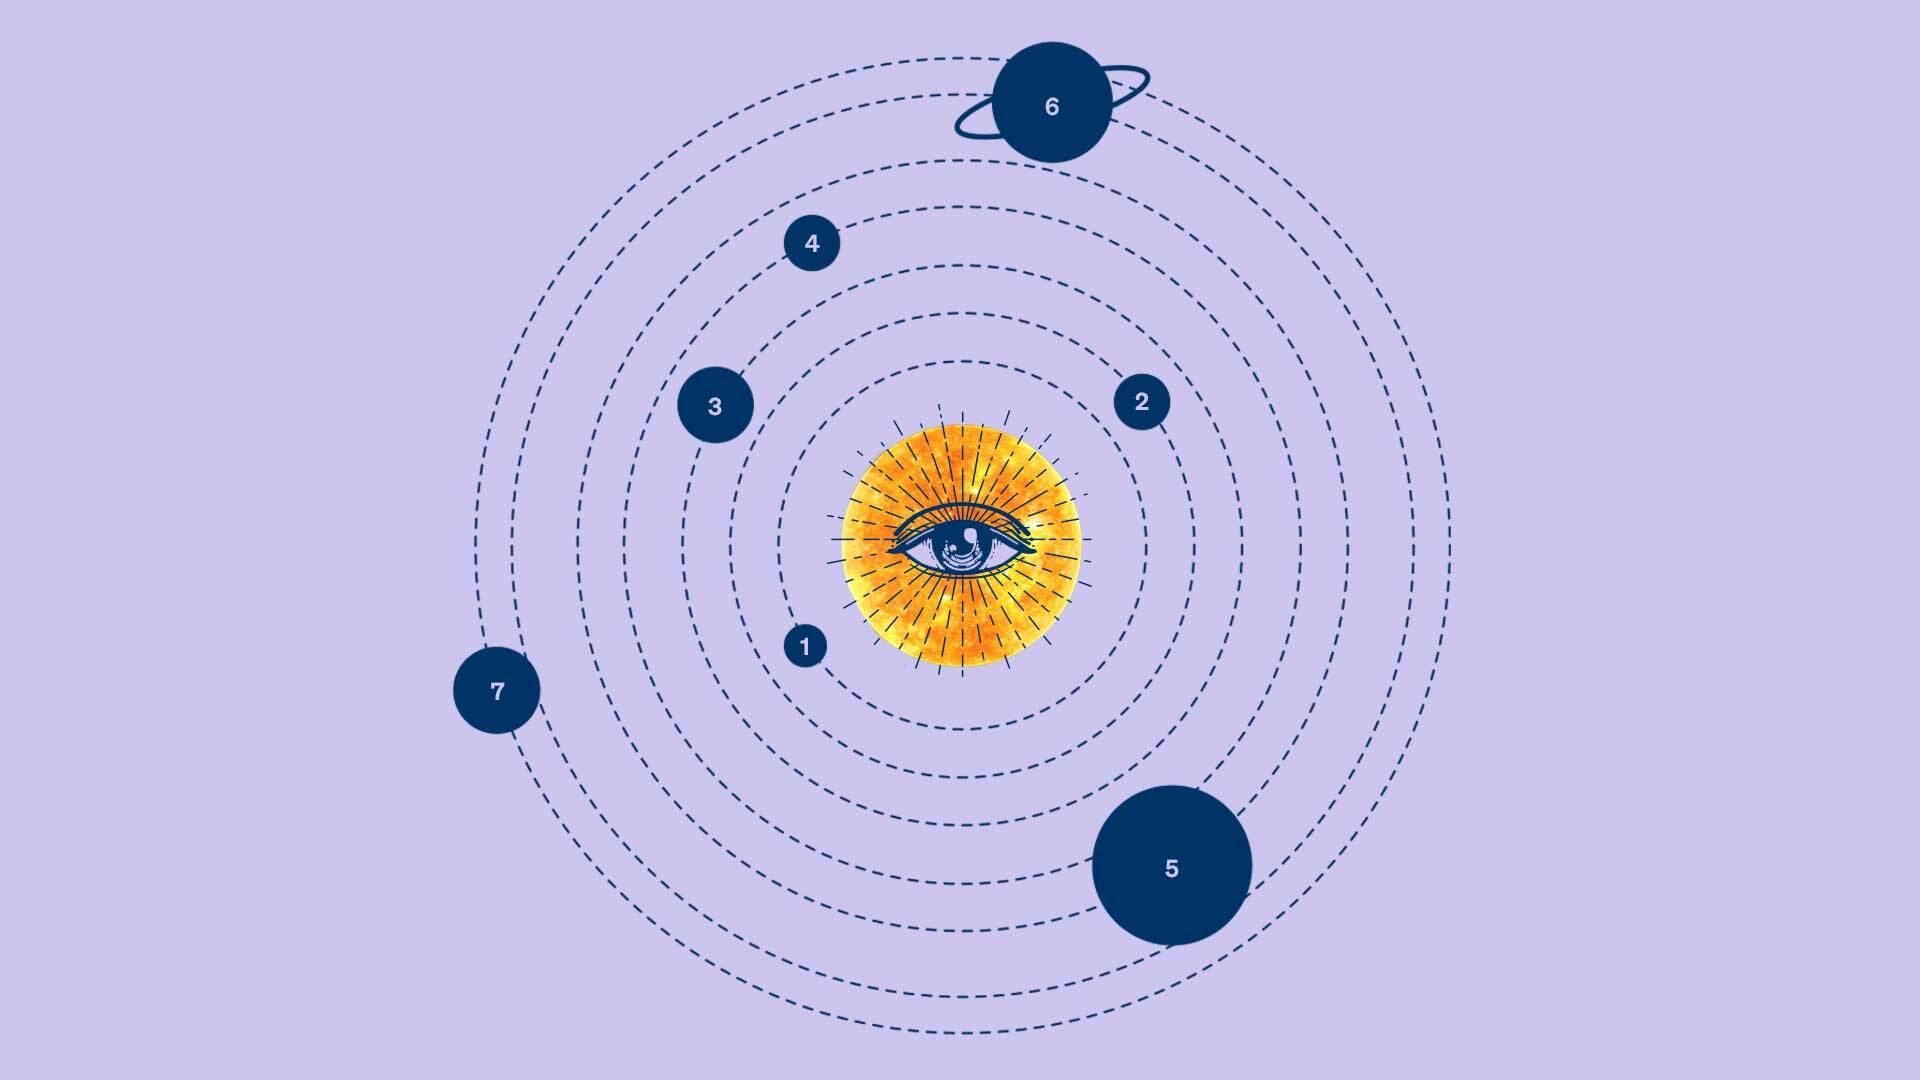 Graphic shows a solar system diagram with an eye representing the sun.